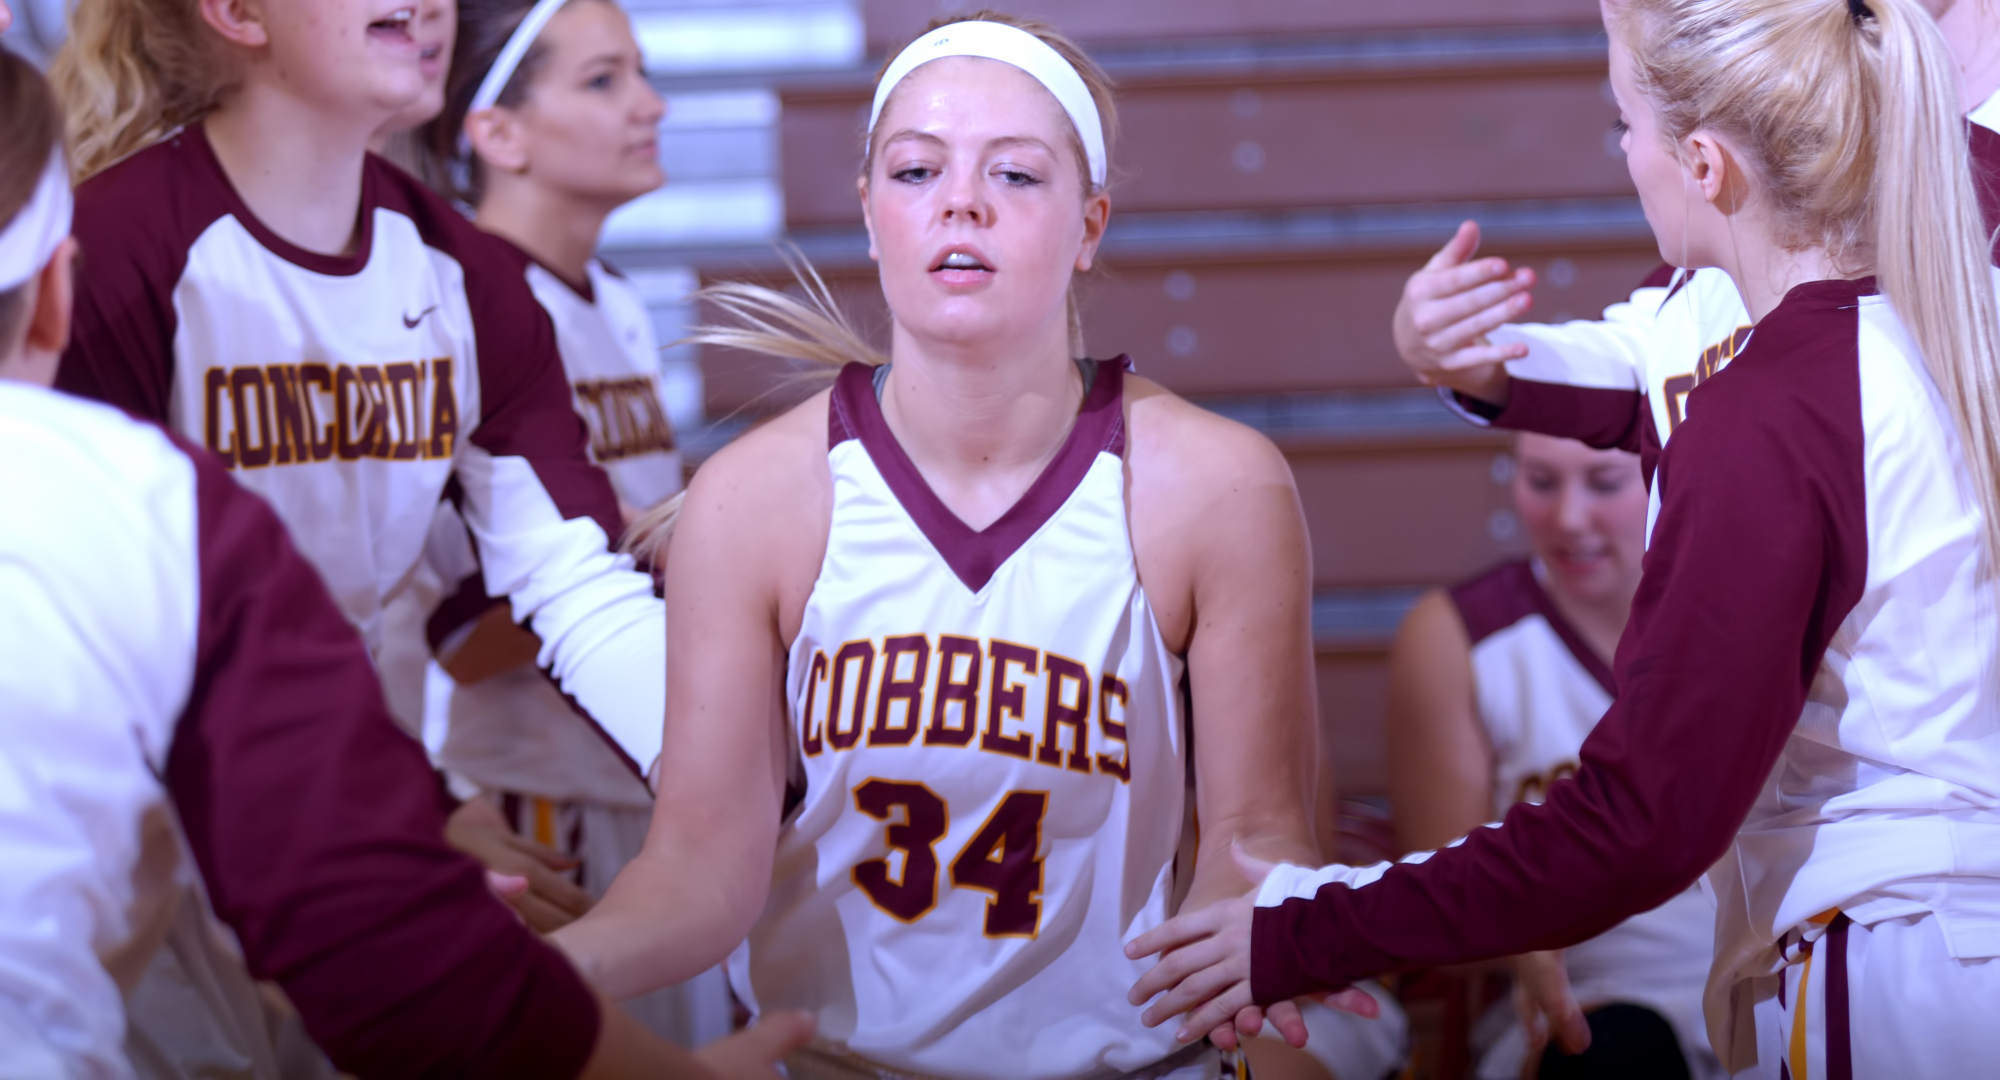 Junior Grace Wolhowe scored a career-high 23 points in the Cobbers' year-ending game at St. Scholastica.